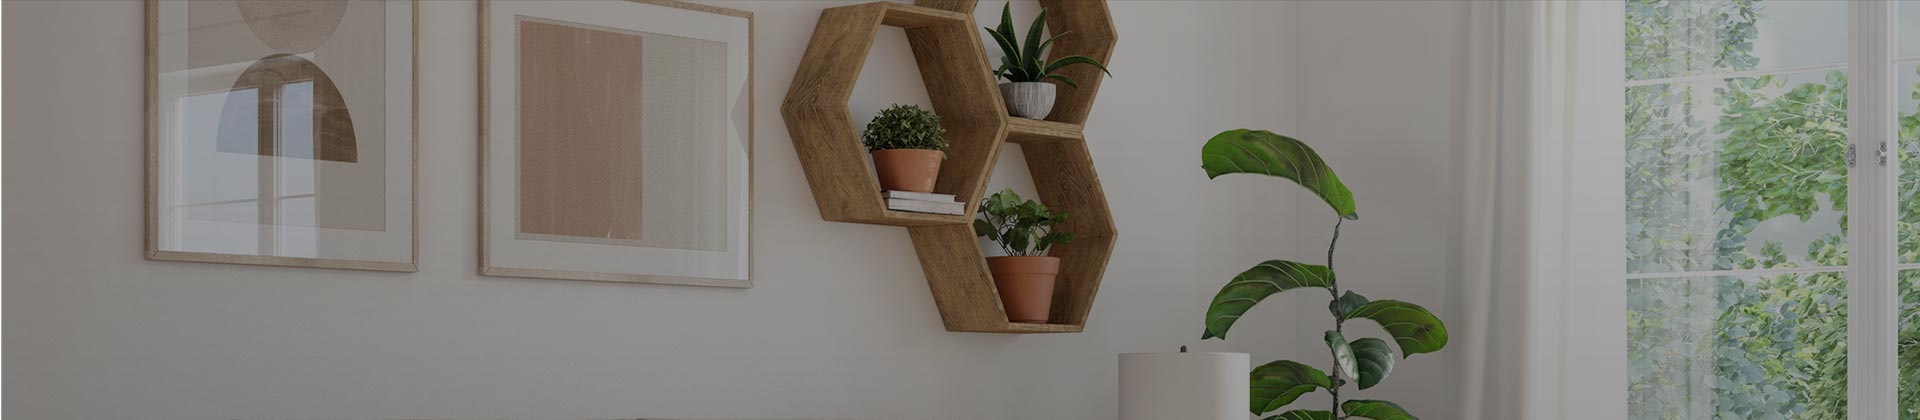 Room with plants on shelves